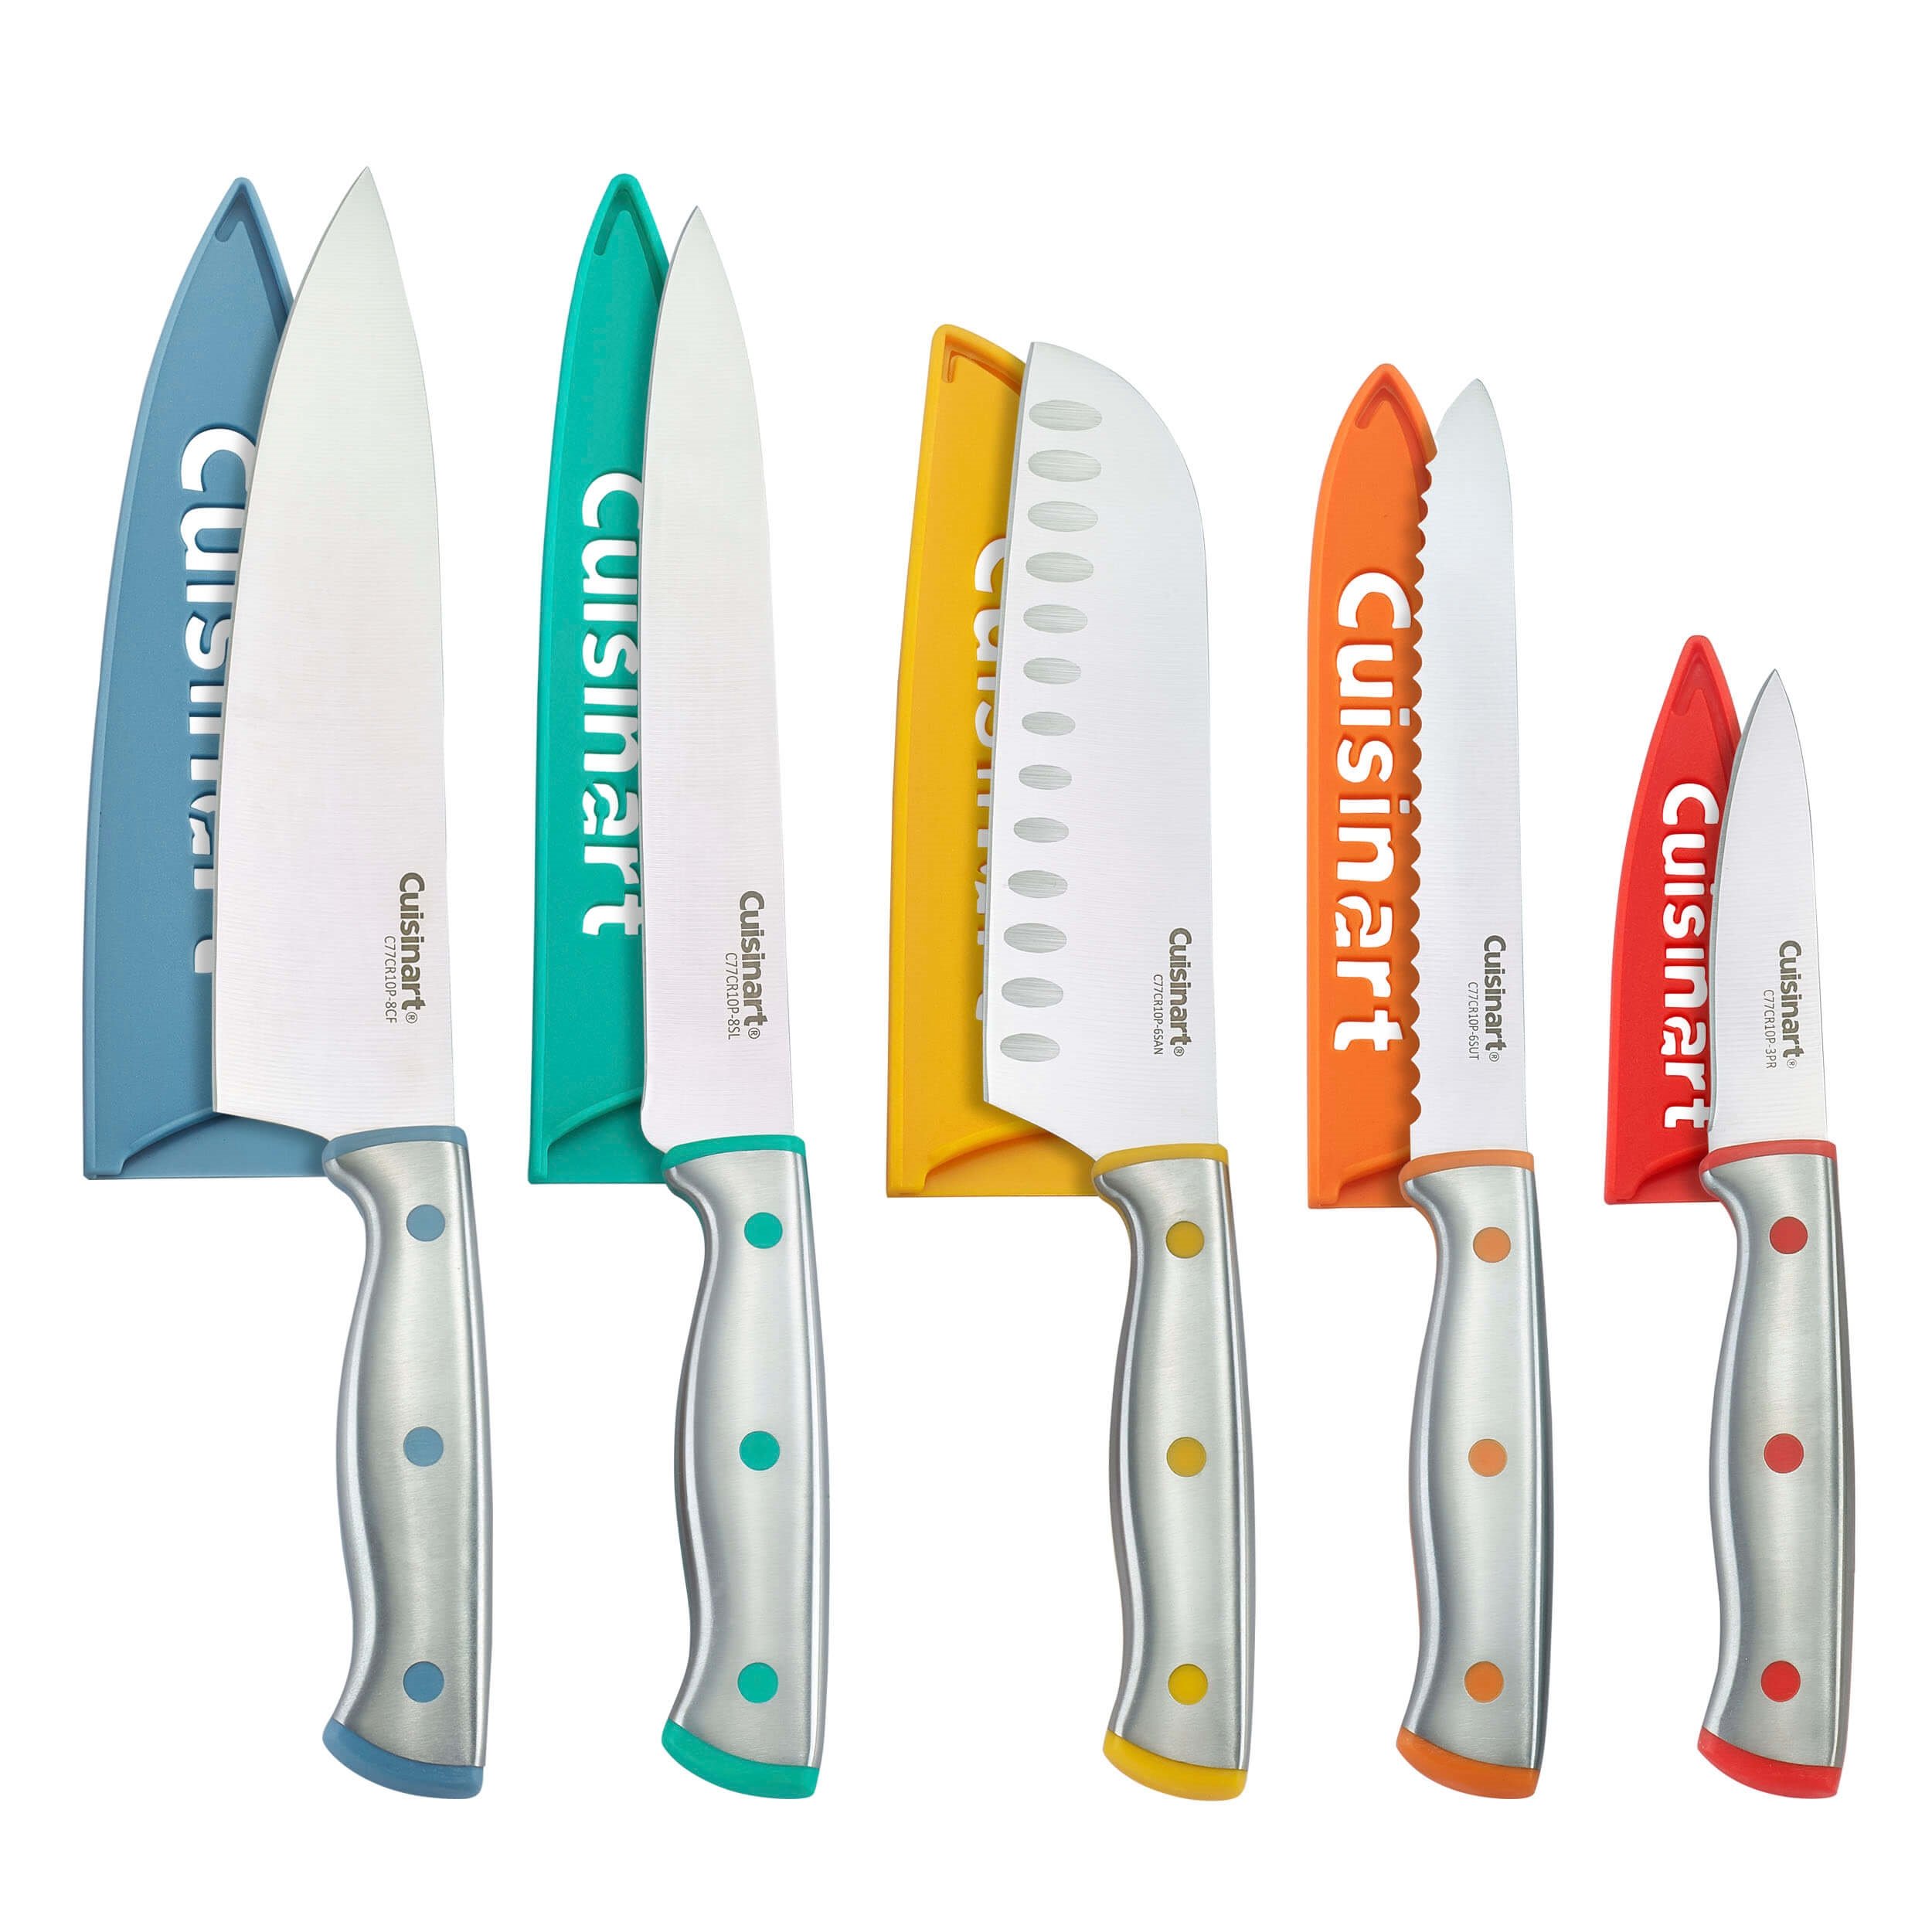 Cuisinart Premium 12 Piece Knife Set with Blade Guards - High-Quality  Stainless Steel Blades - Non-Stick Color Coding - Dishwasher Safe in the  Cutlery department at